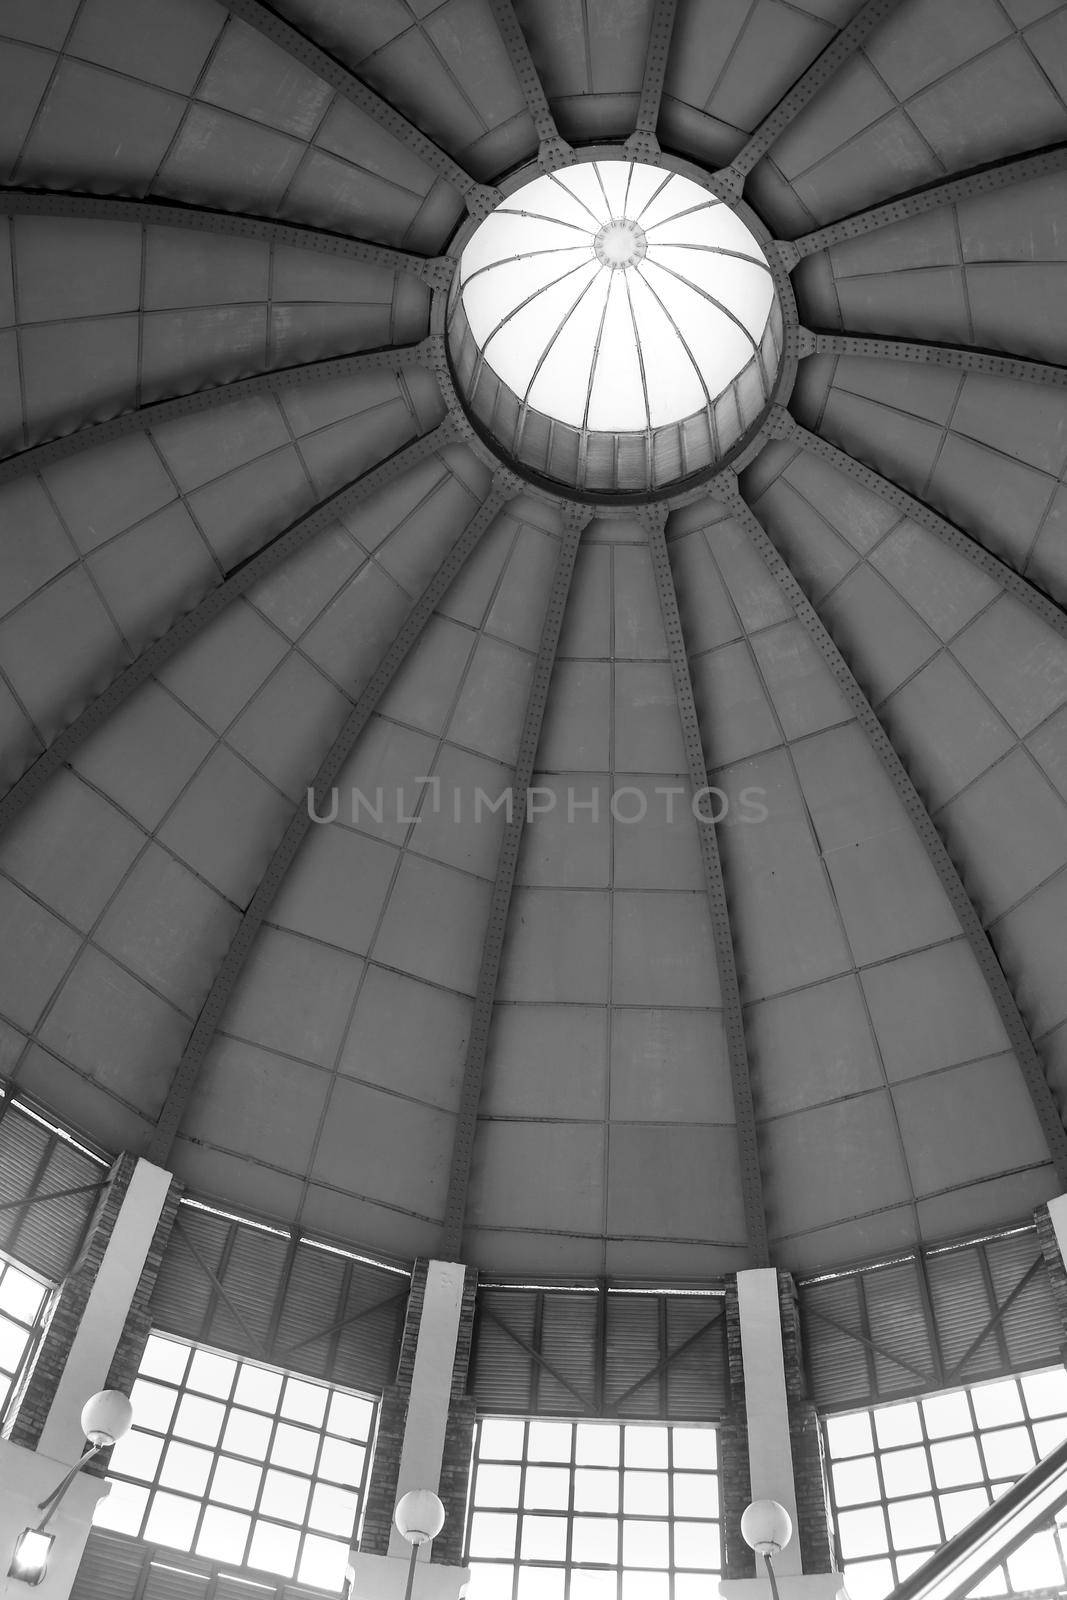 Alicante, Spain- March 28, 2022: Interior view of the dome art nouveau style of the Central Market of Alicante